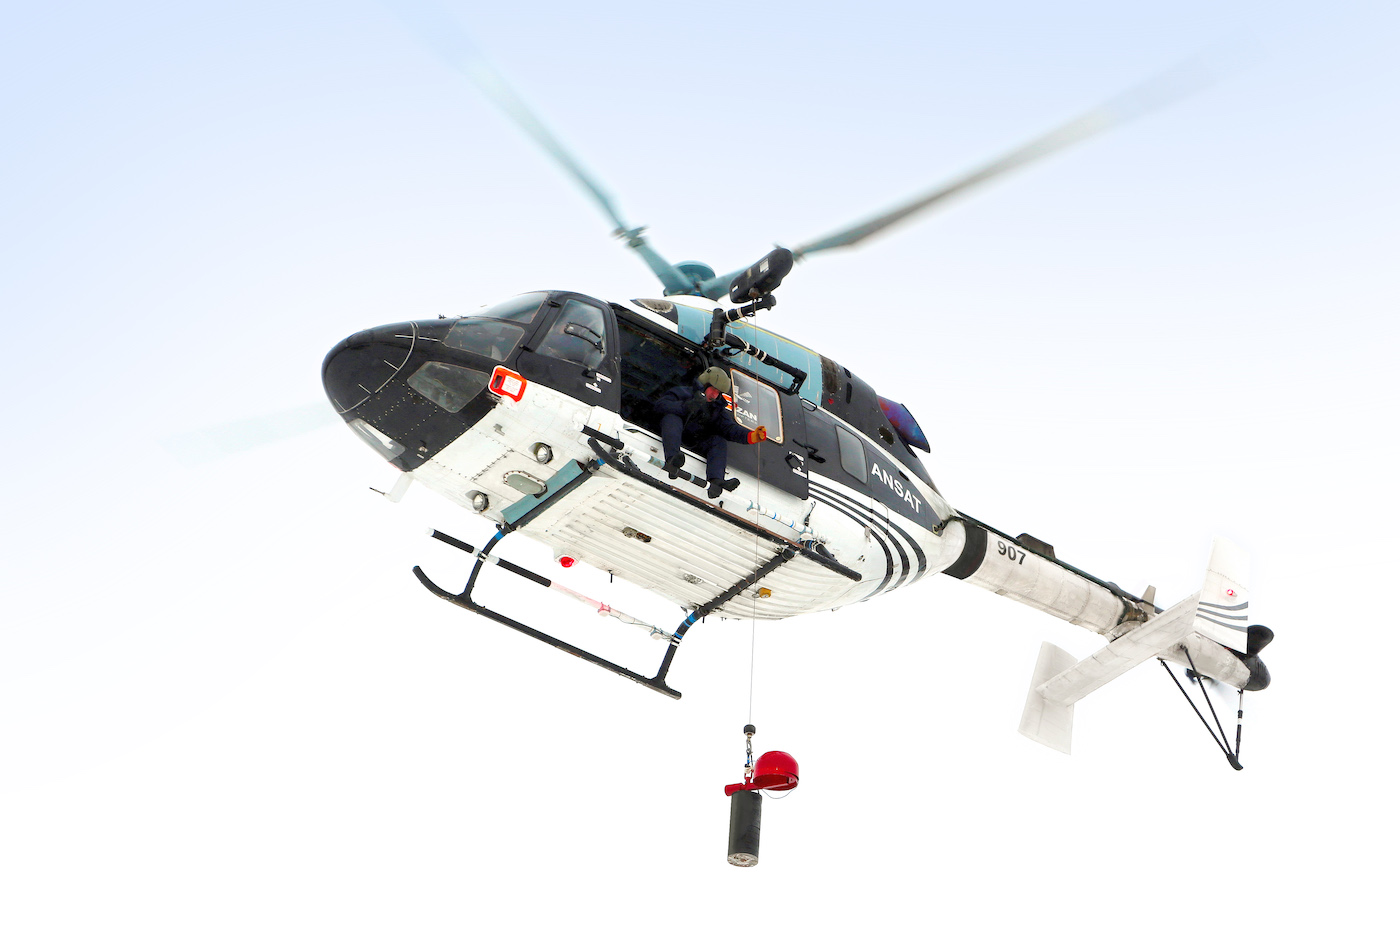 Ansat Helicopter from Rostec Can Lift up to 1,000 kg on an External Sling